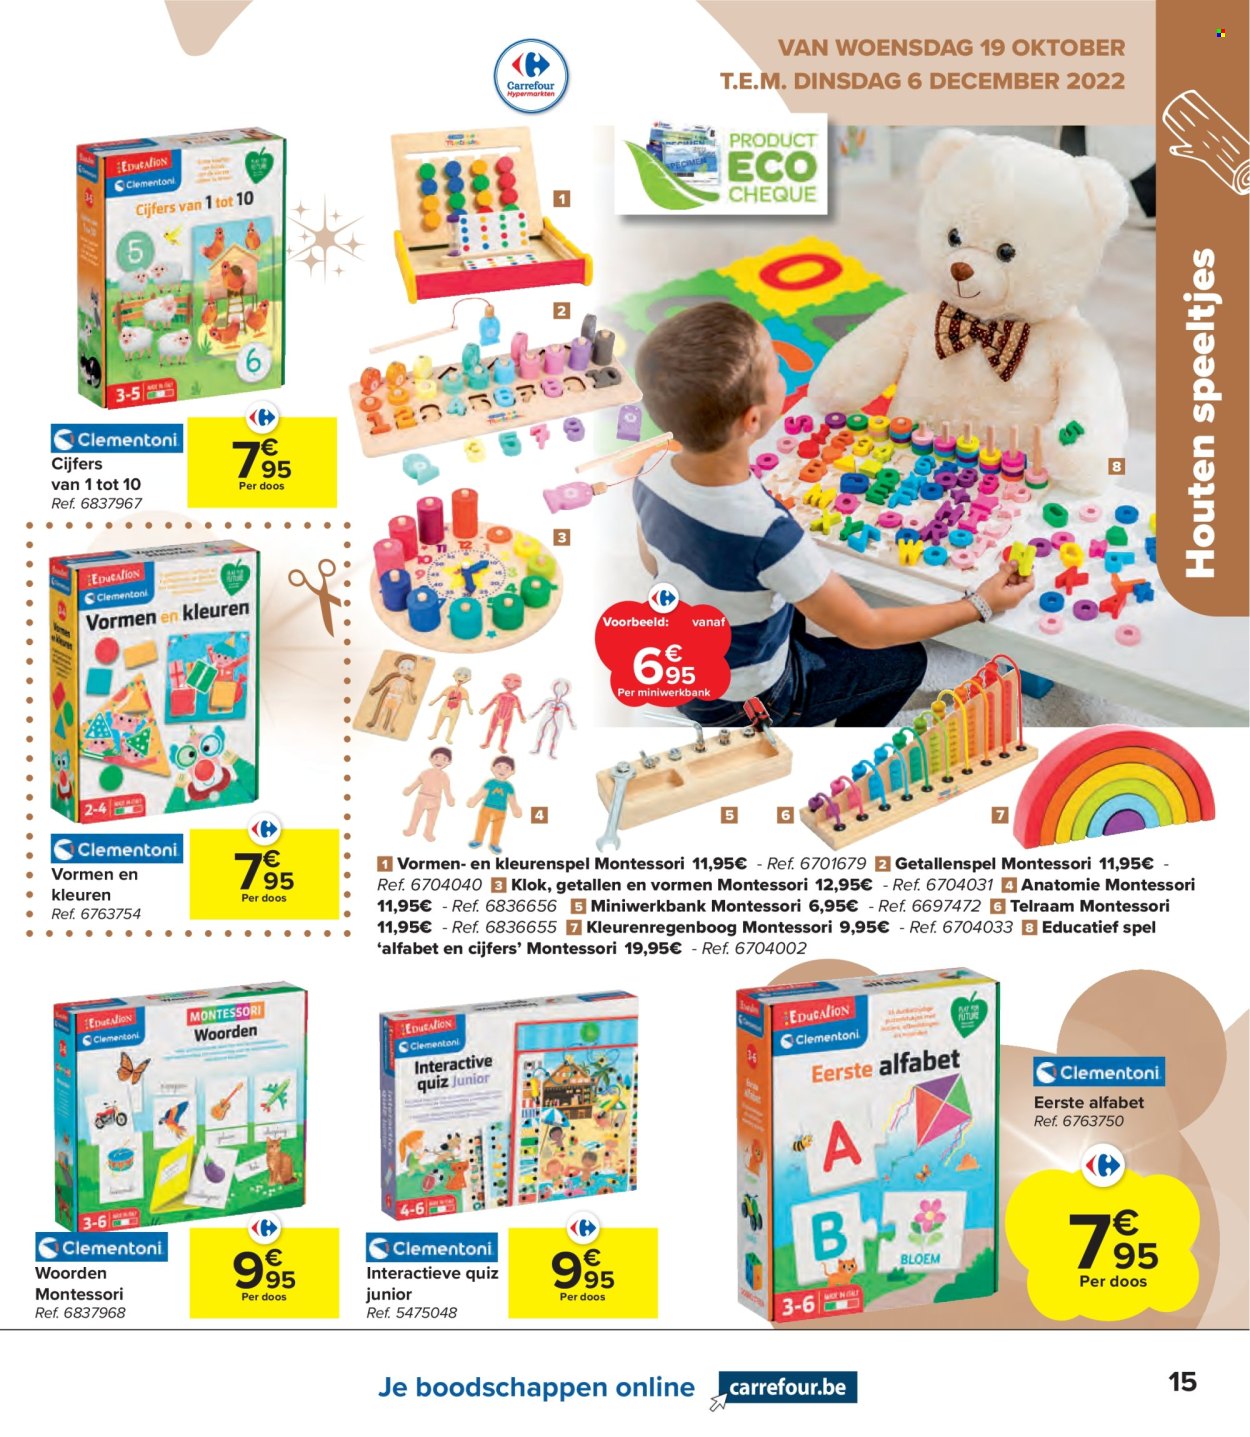 Catalogue Carrefour hypermarkt - 19.10.2022 - 6.12.2022. Page 15.